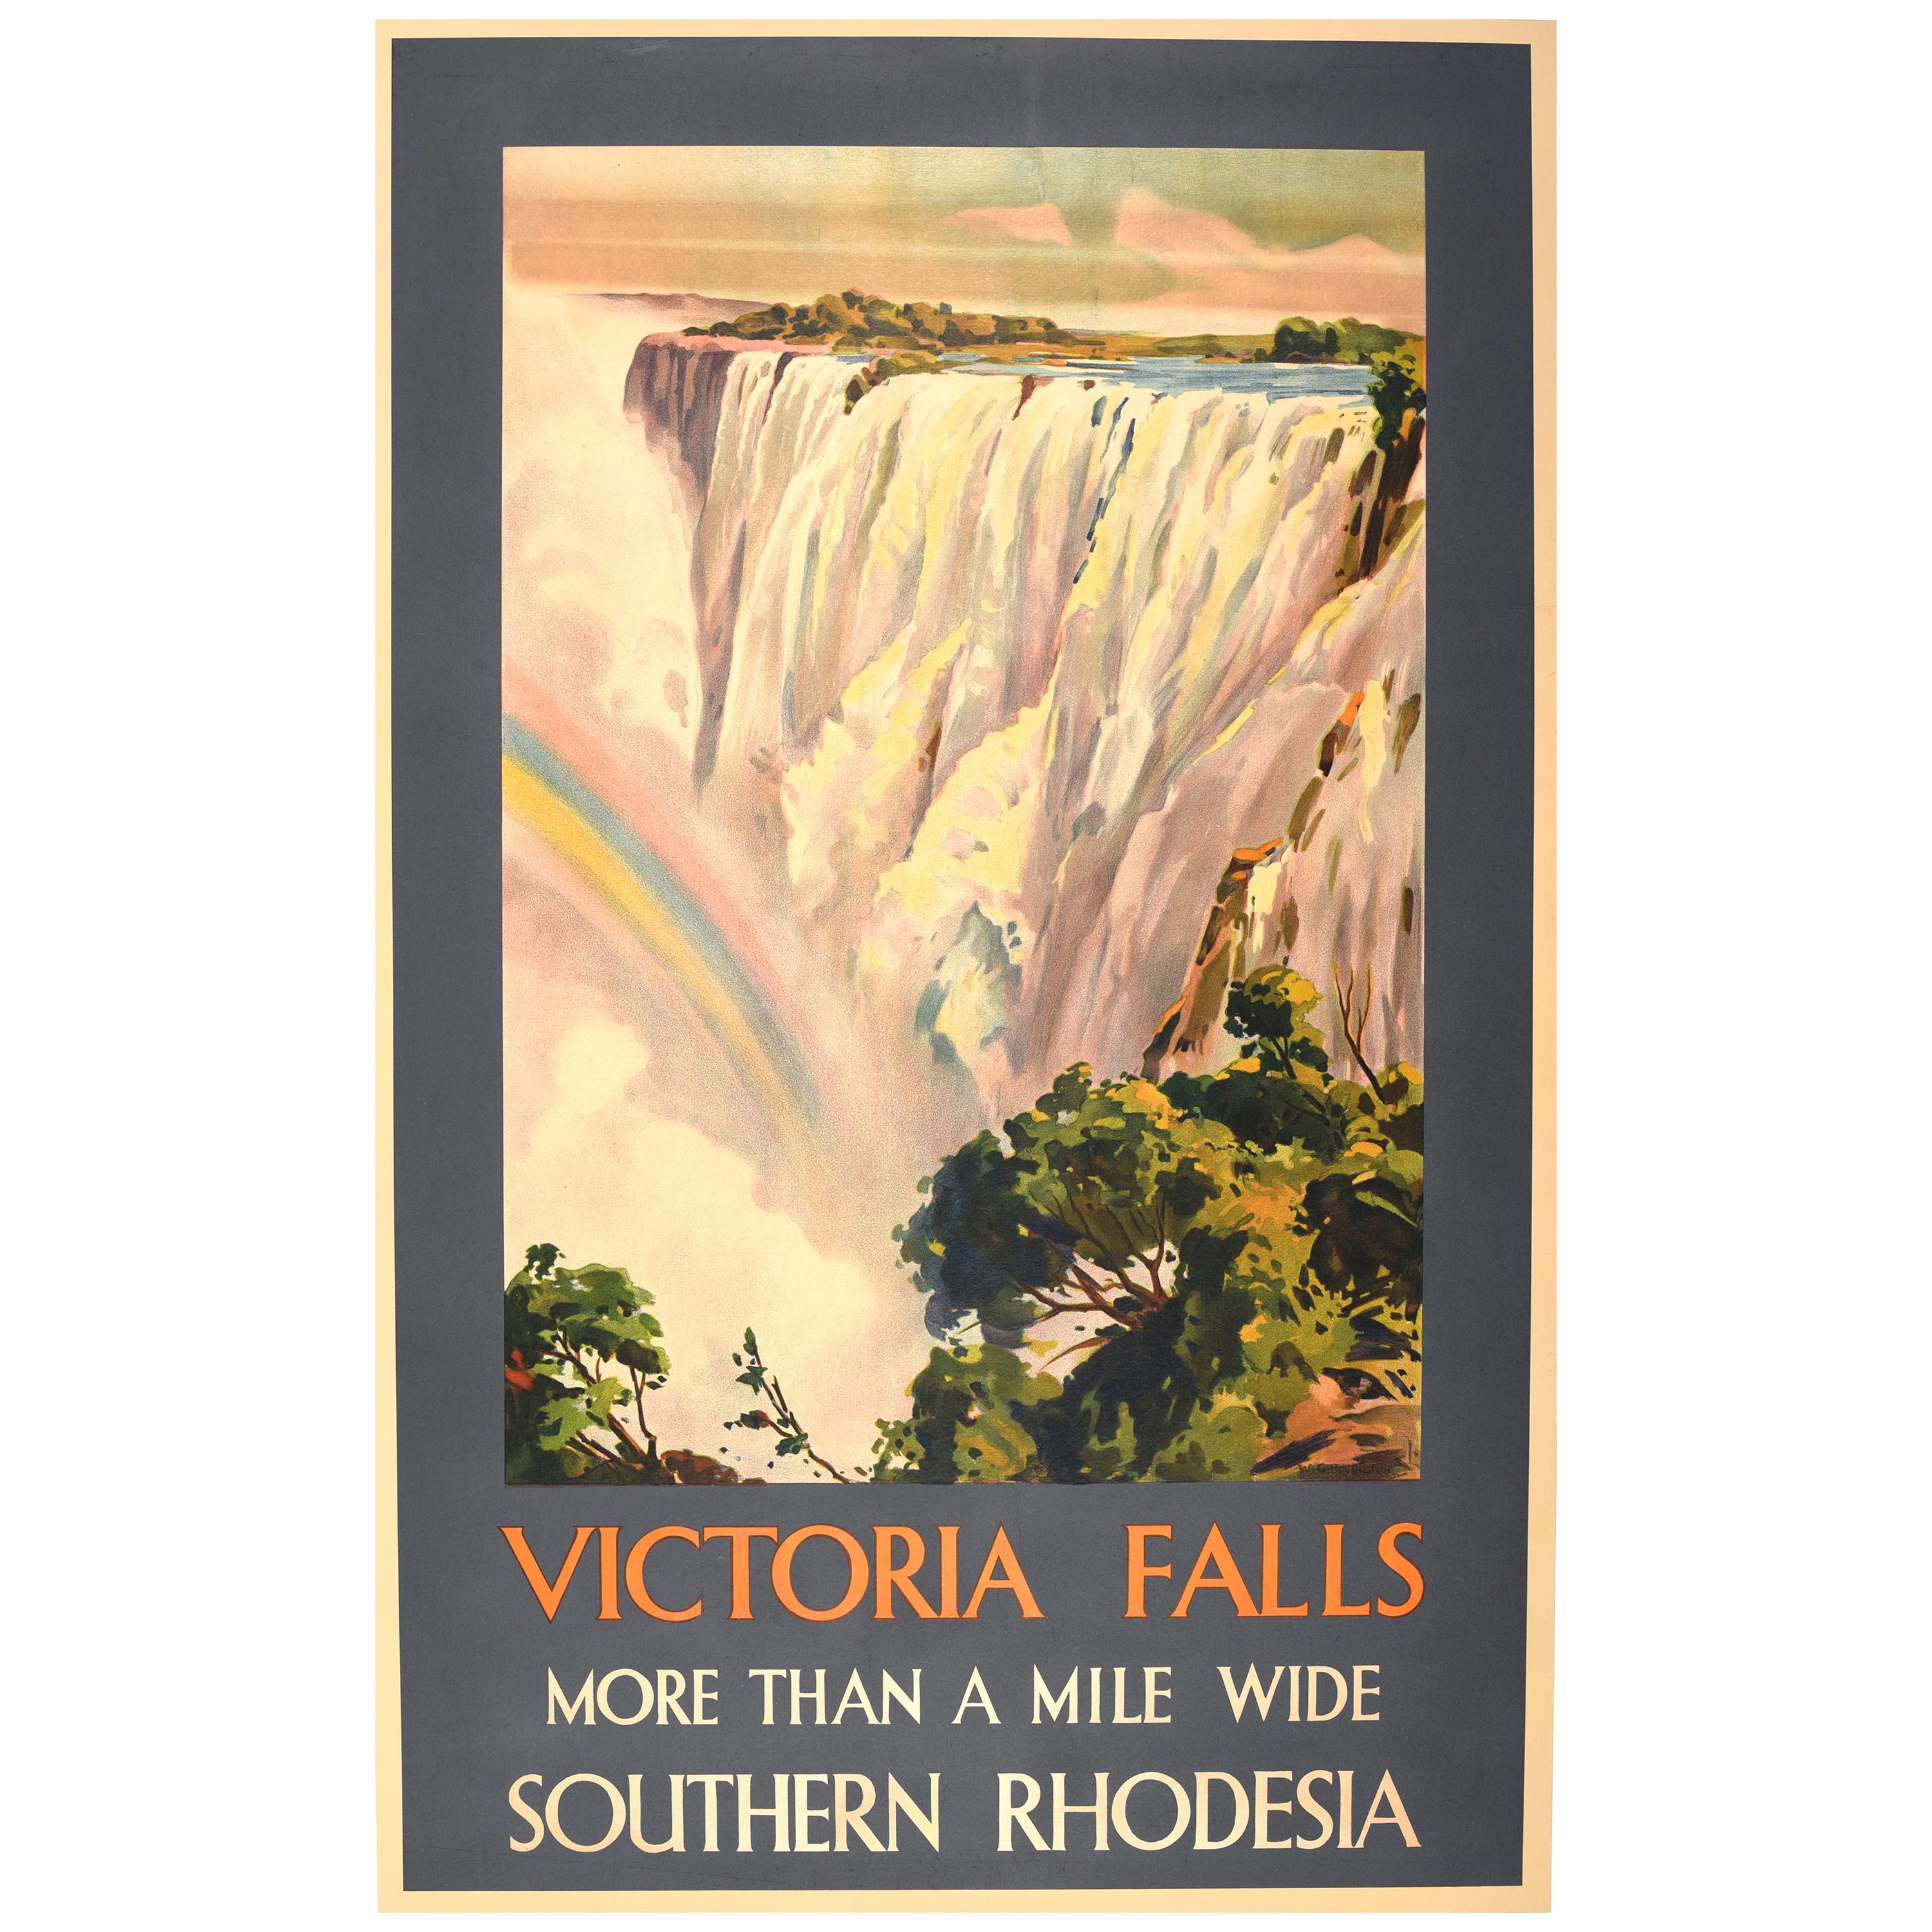 Original Vintage Travel Poster Victoria Falls Waterfall Southern Rhodesia Africa For Sale